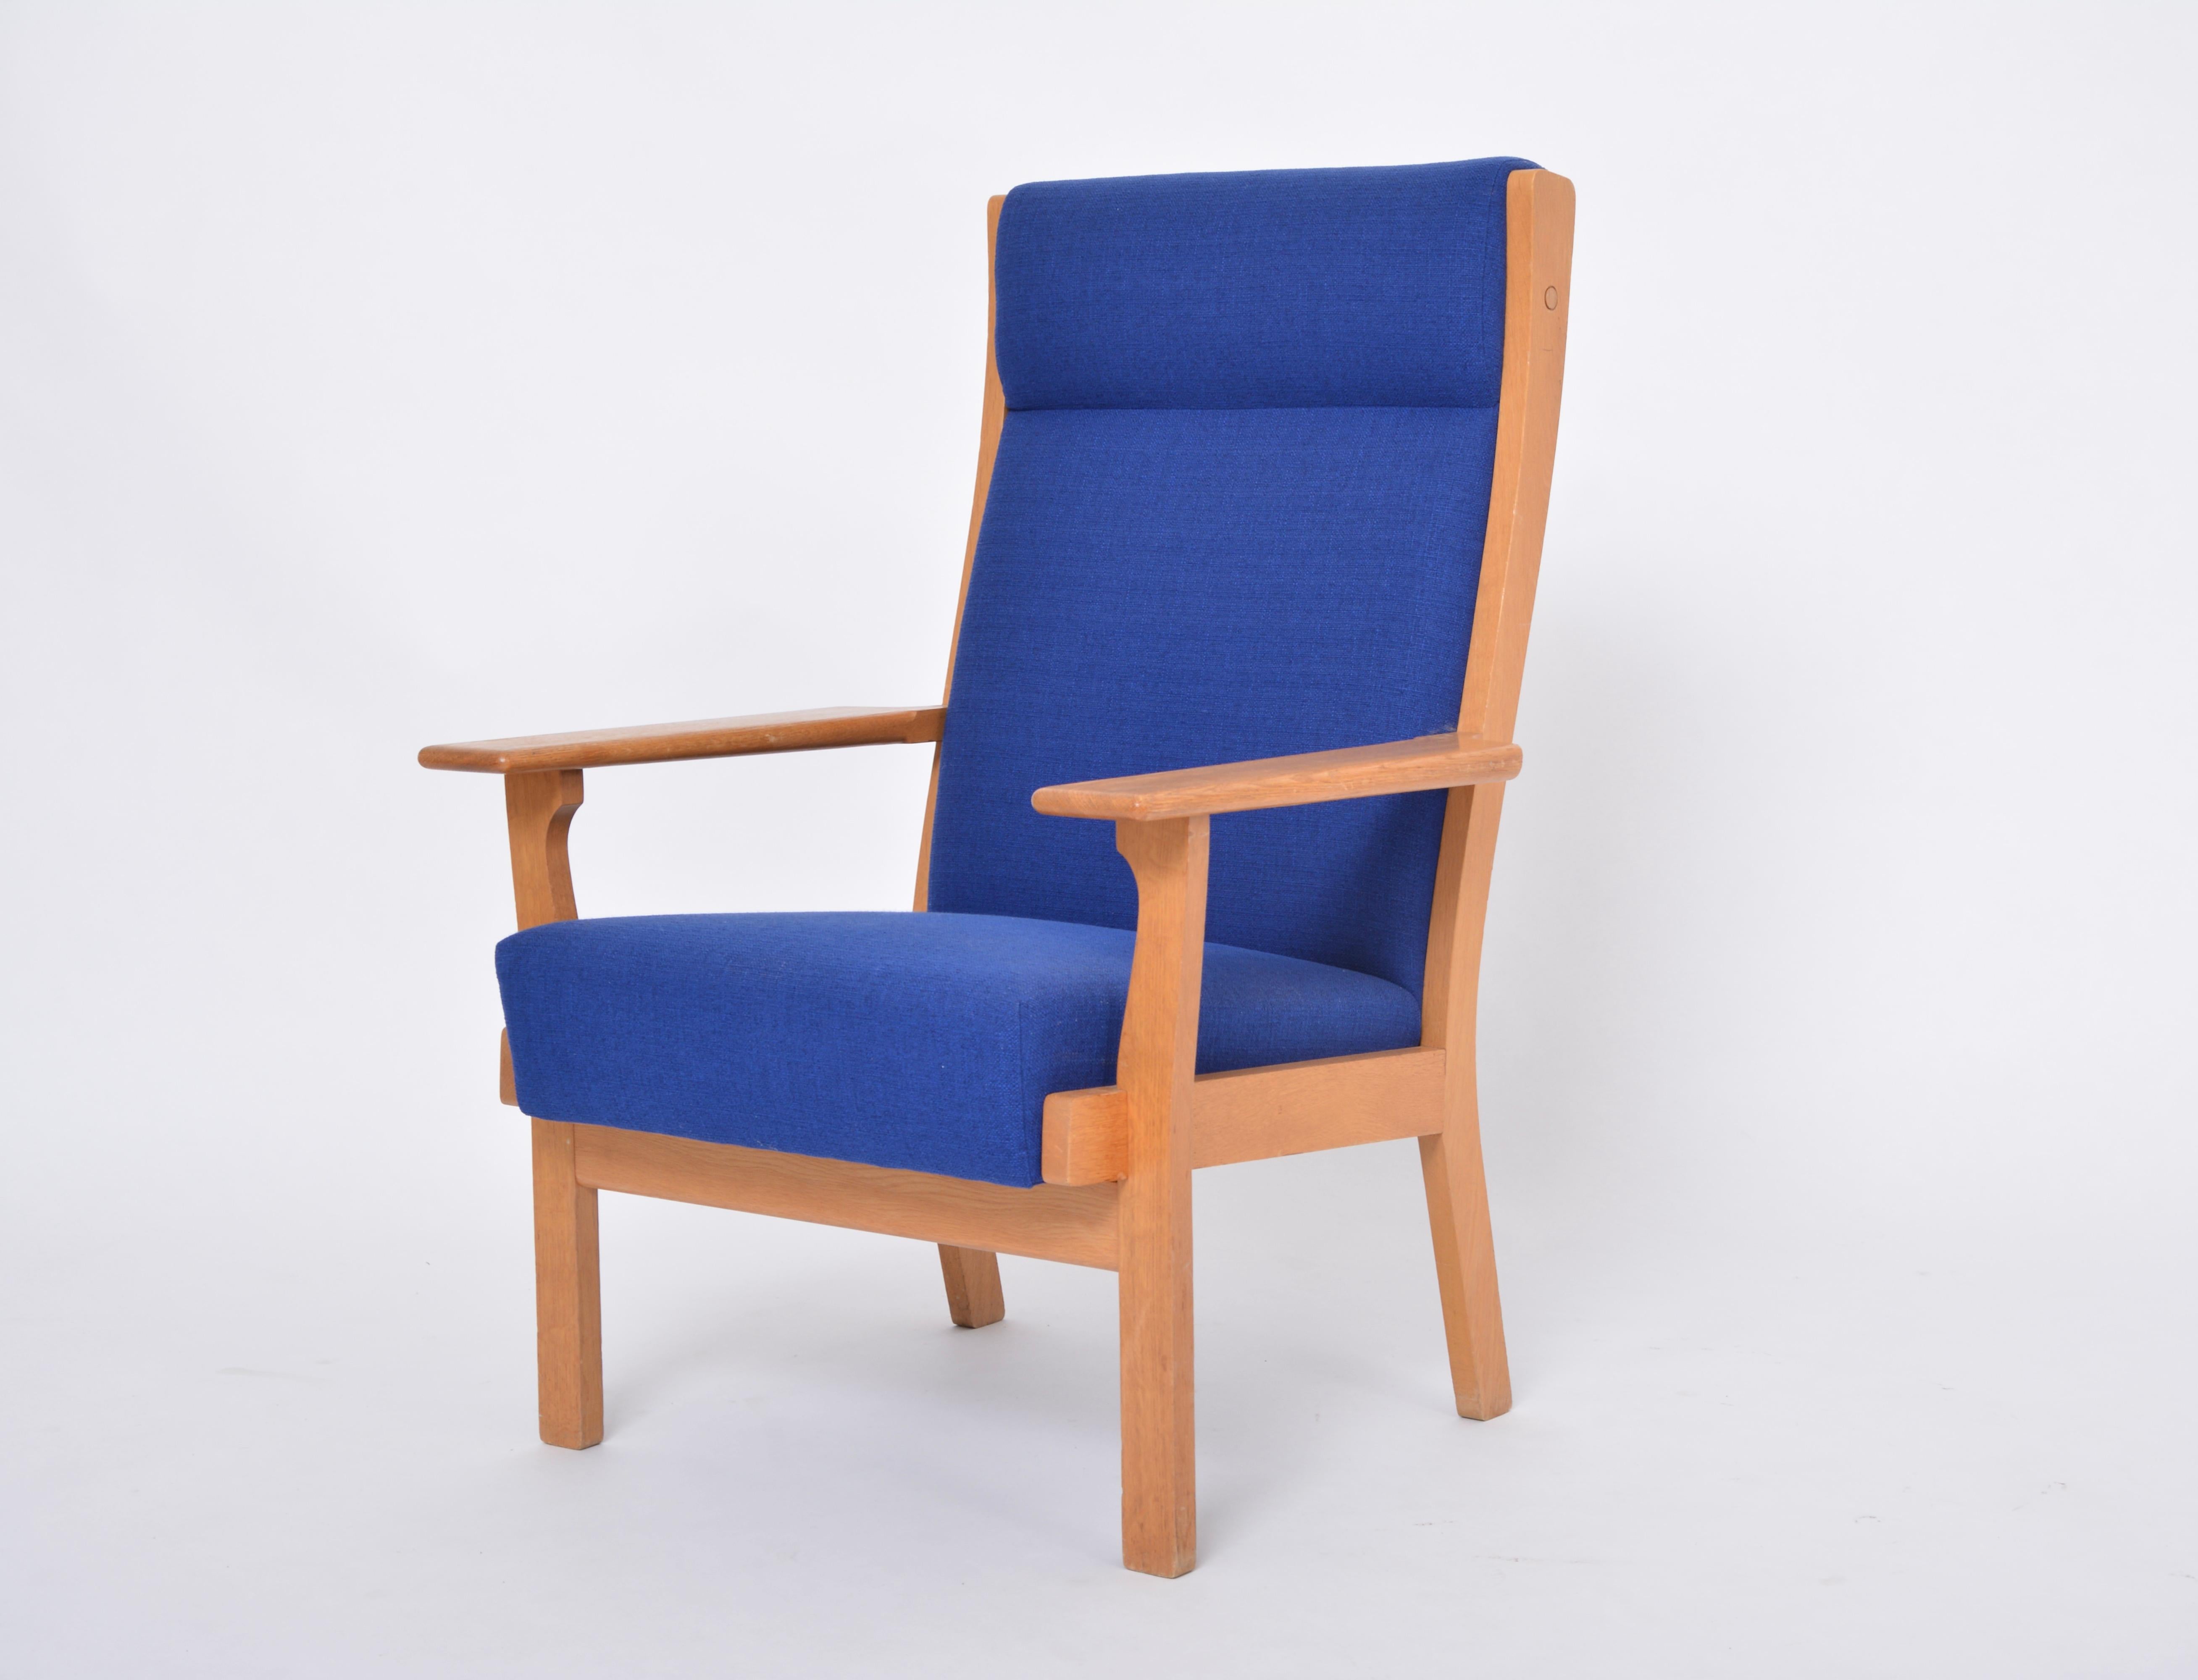 Reupholstered Danish Mid-Century Modern GE 181 a Chair by Hans Wegner for GETAMA

This armchair (Model GE 181 A) was designed by Hans Wegner and produced with outstanding craftsmanship by the Danish company GETAMA. The chair is made from oak and has